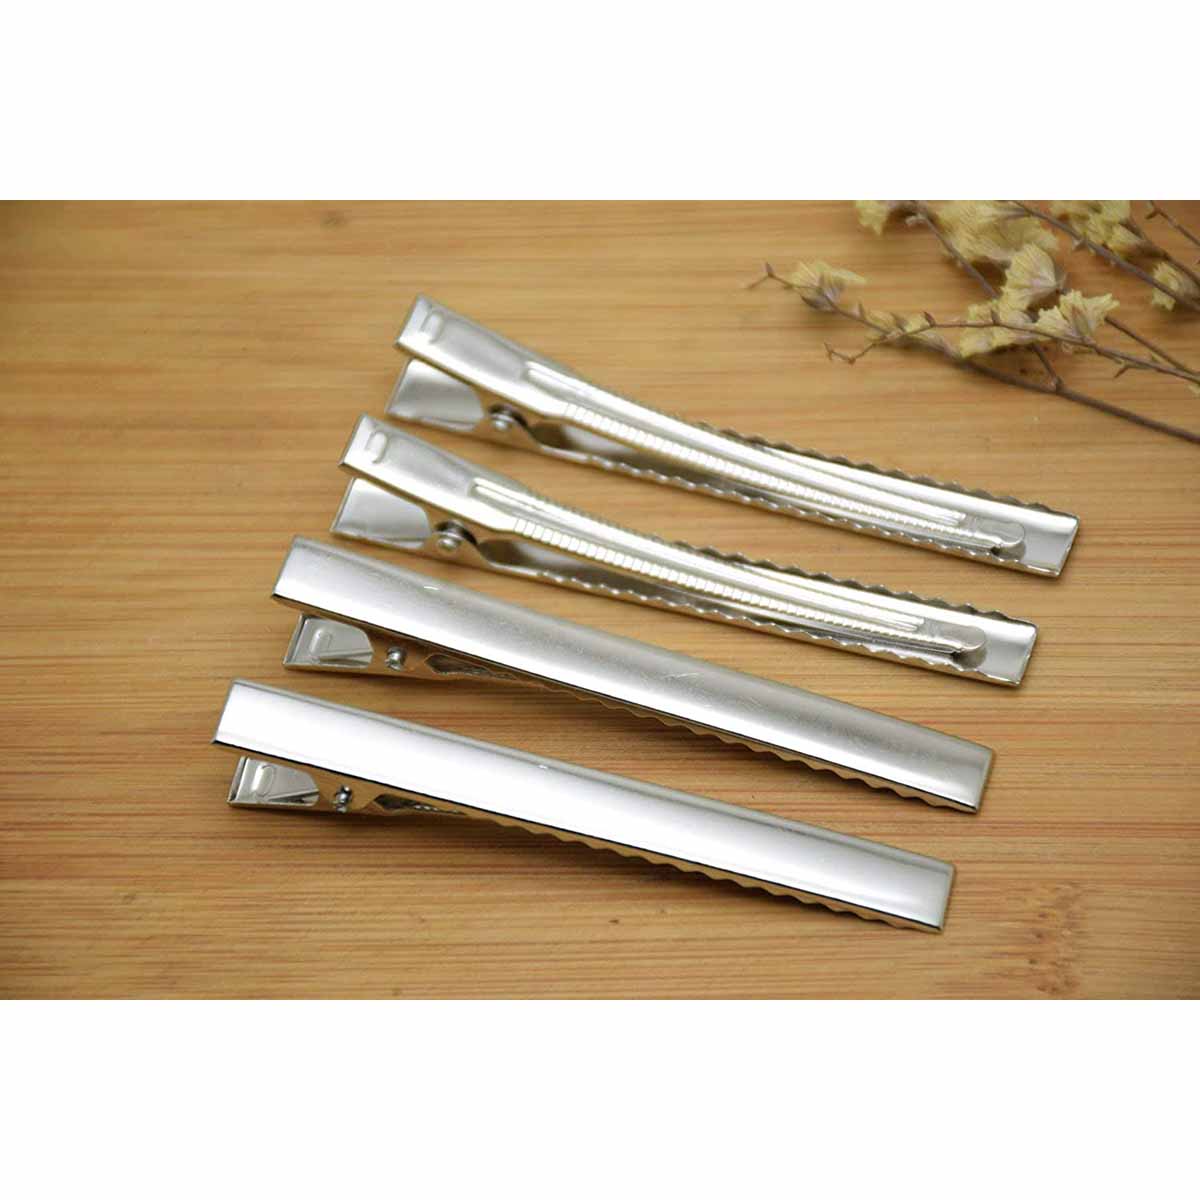 100 rectangle alligator hair clips 55mm-Silver